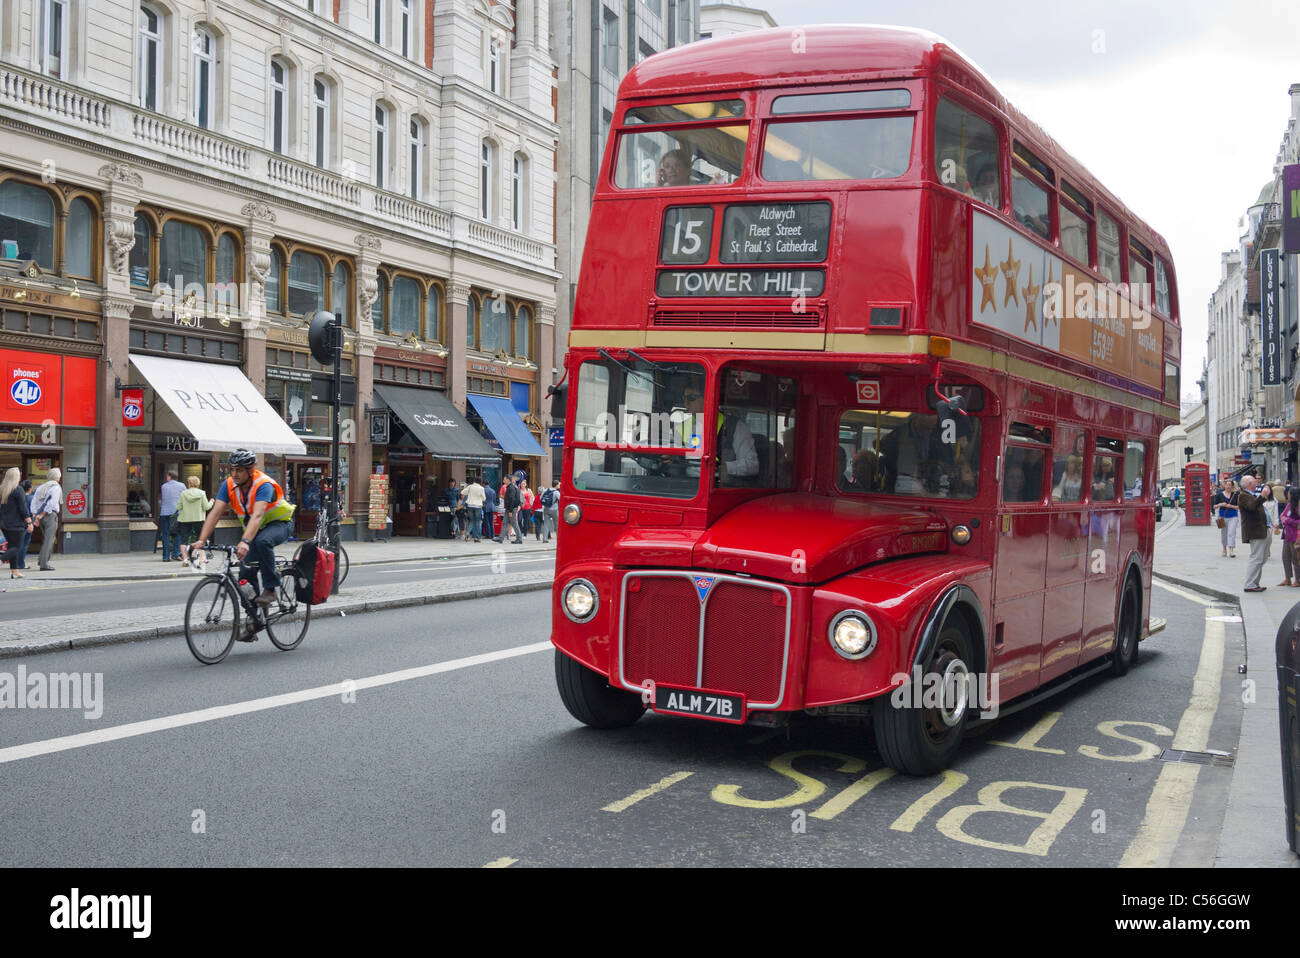 Routemaster tourist bus, route 15 heritage bus in The Strand London GB UK Stock Photo